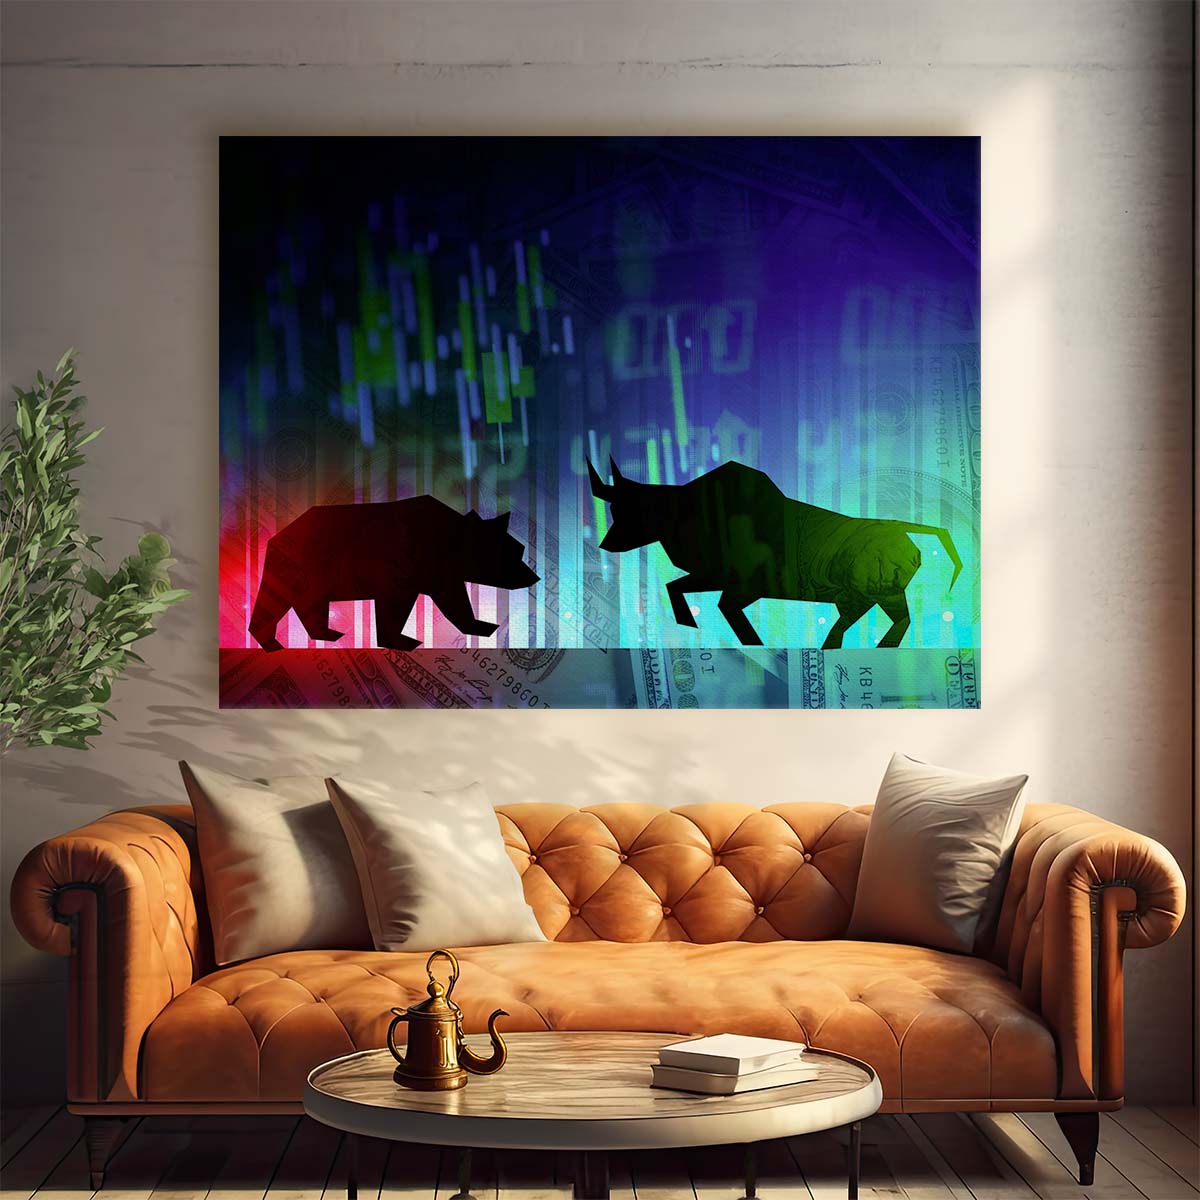 WallStreet Bear and Bull Wall Art by Luxuriance Designs. Made in USA.